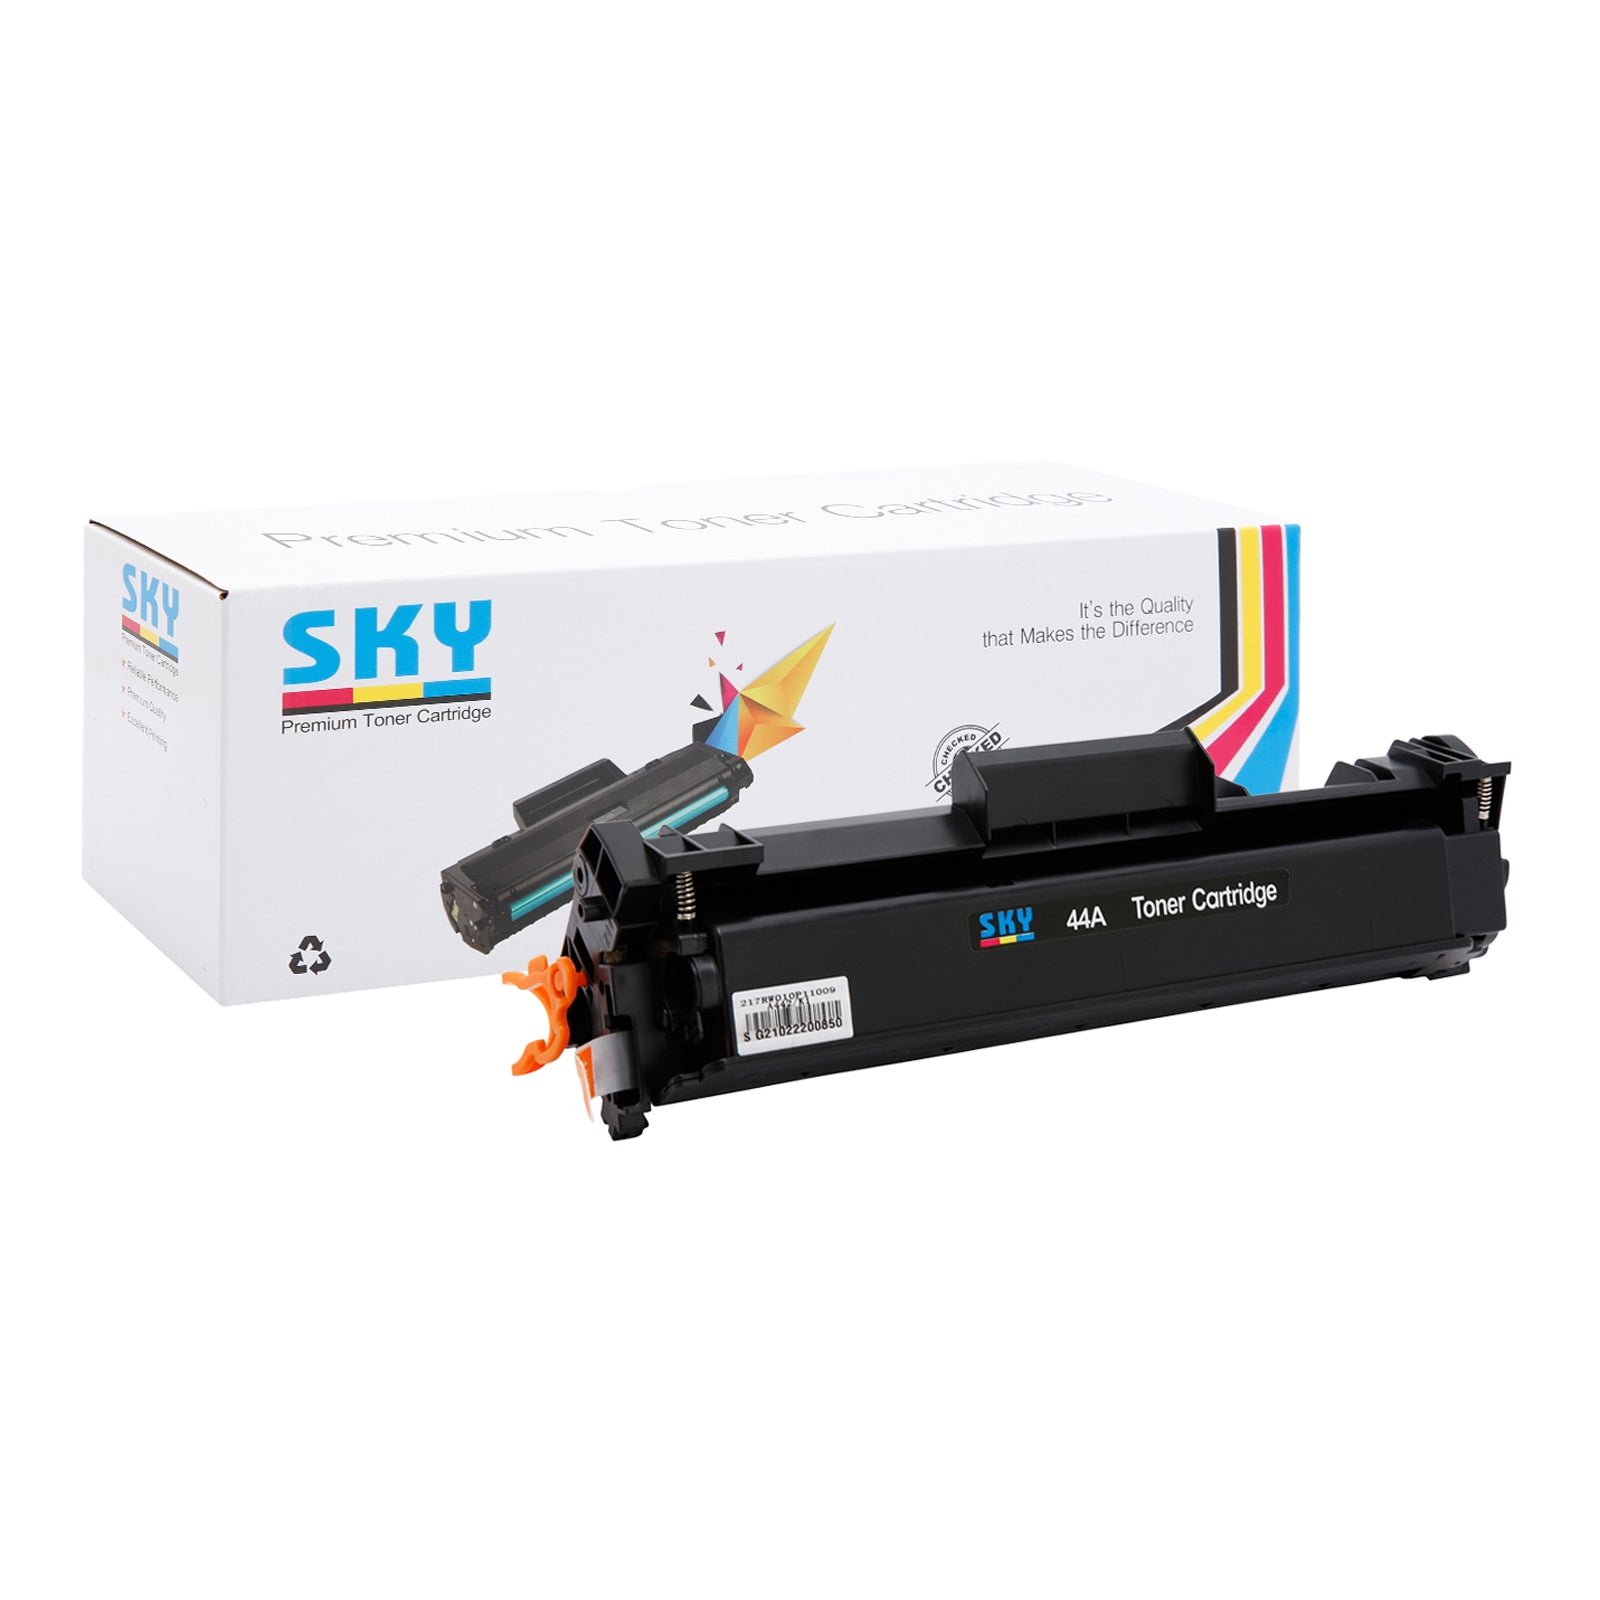 44A Toner Cartridge CF244A for for HP Laserjet Pro M15A M15W MFP M28A and M28W